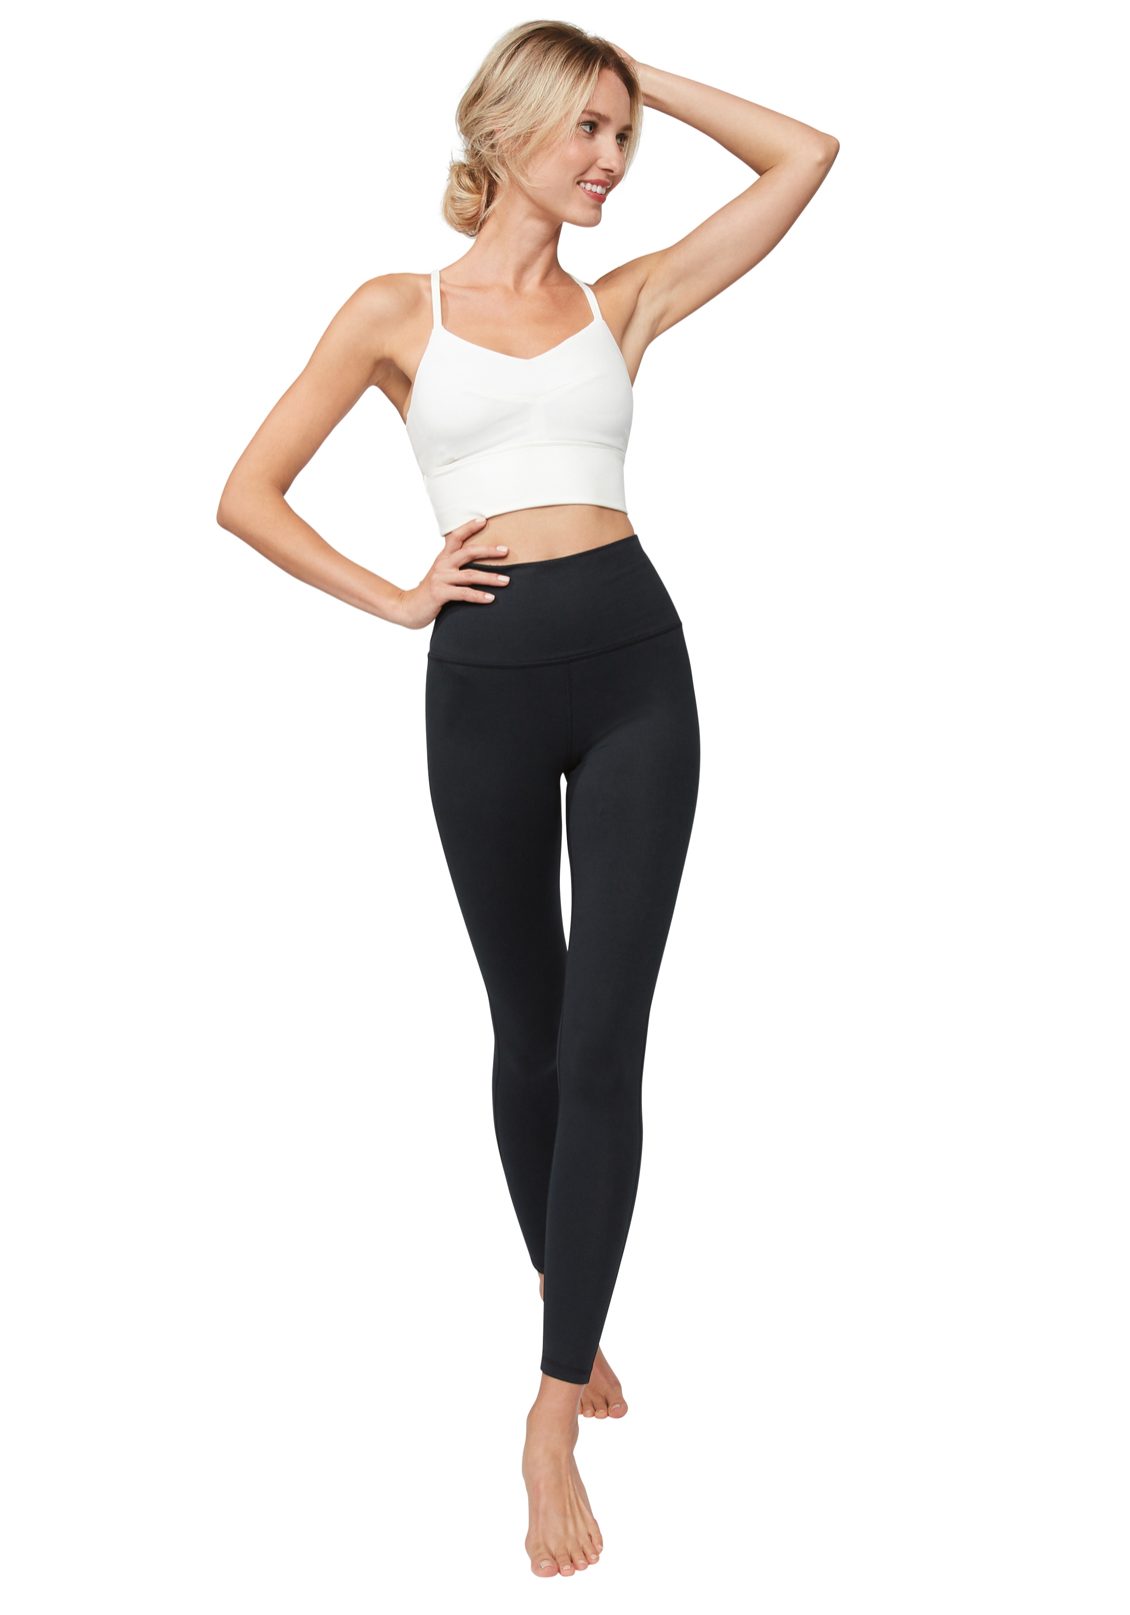 A woman stands with her right hand on her hip, and her left arm bent at the elbow with her hand on her head. Her left foot is slightly in front of her right foot. She is wearing a white cropped top and a pair of black high waisted leggings.